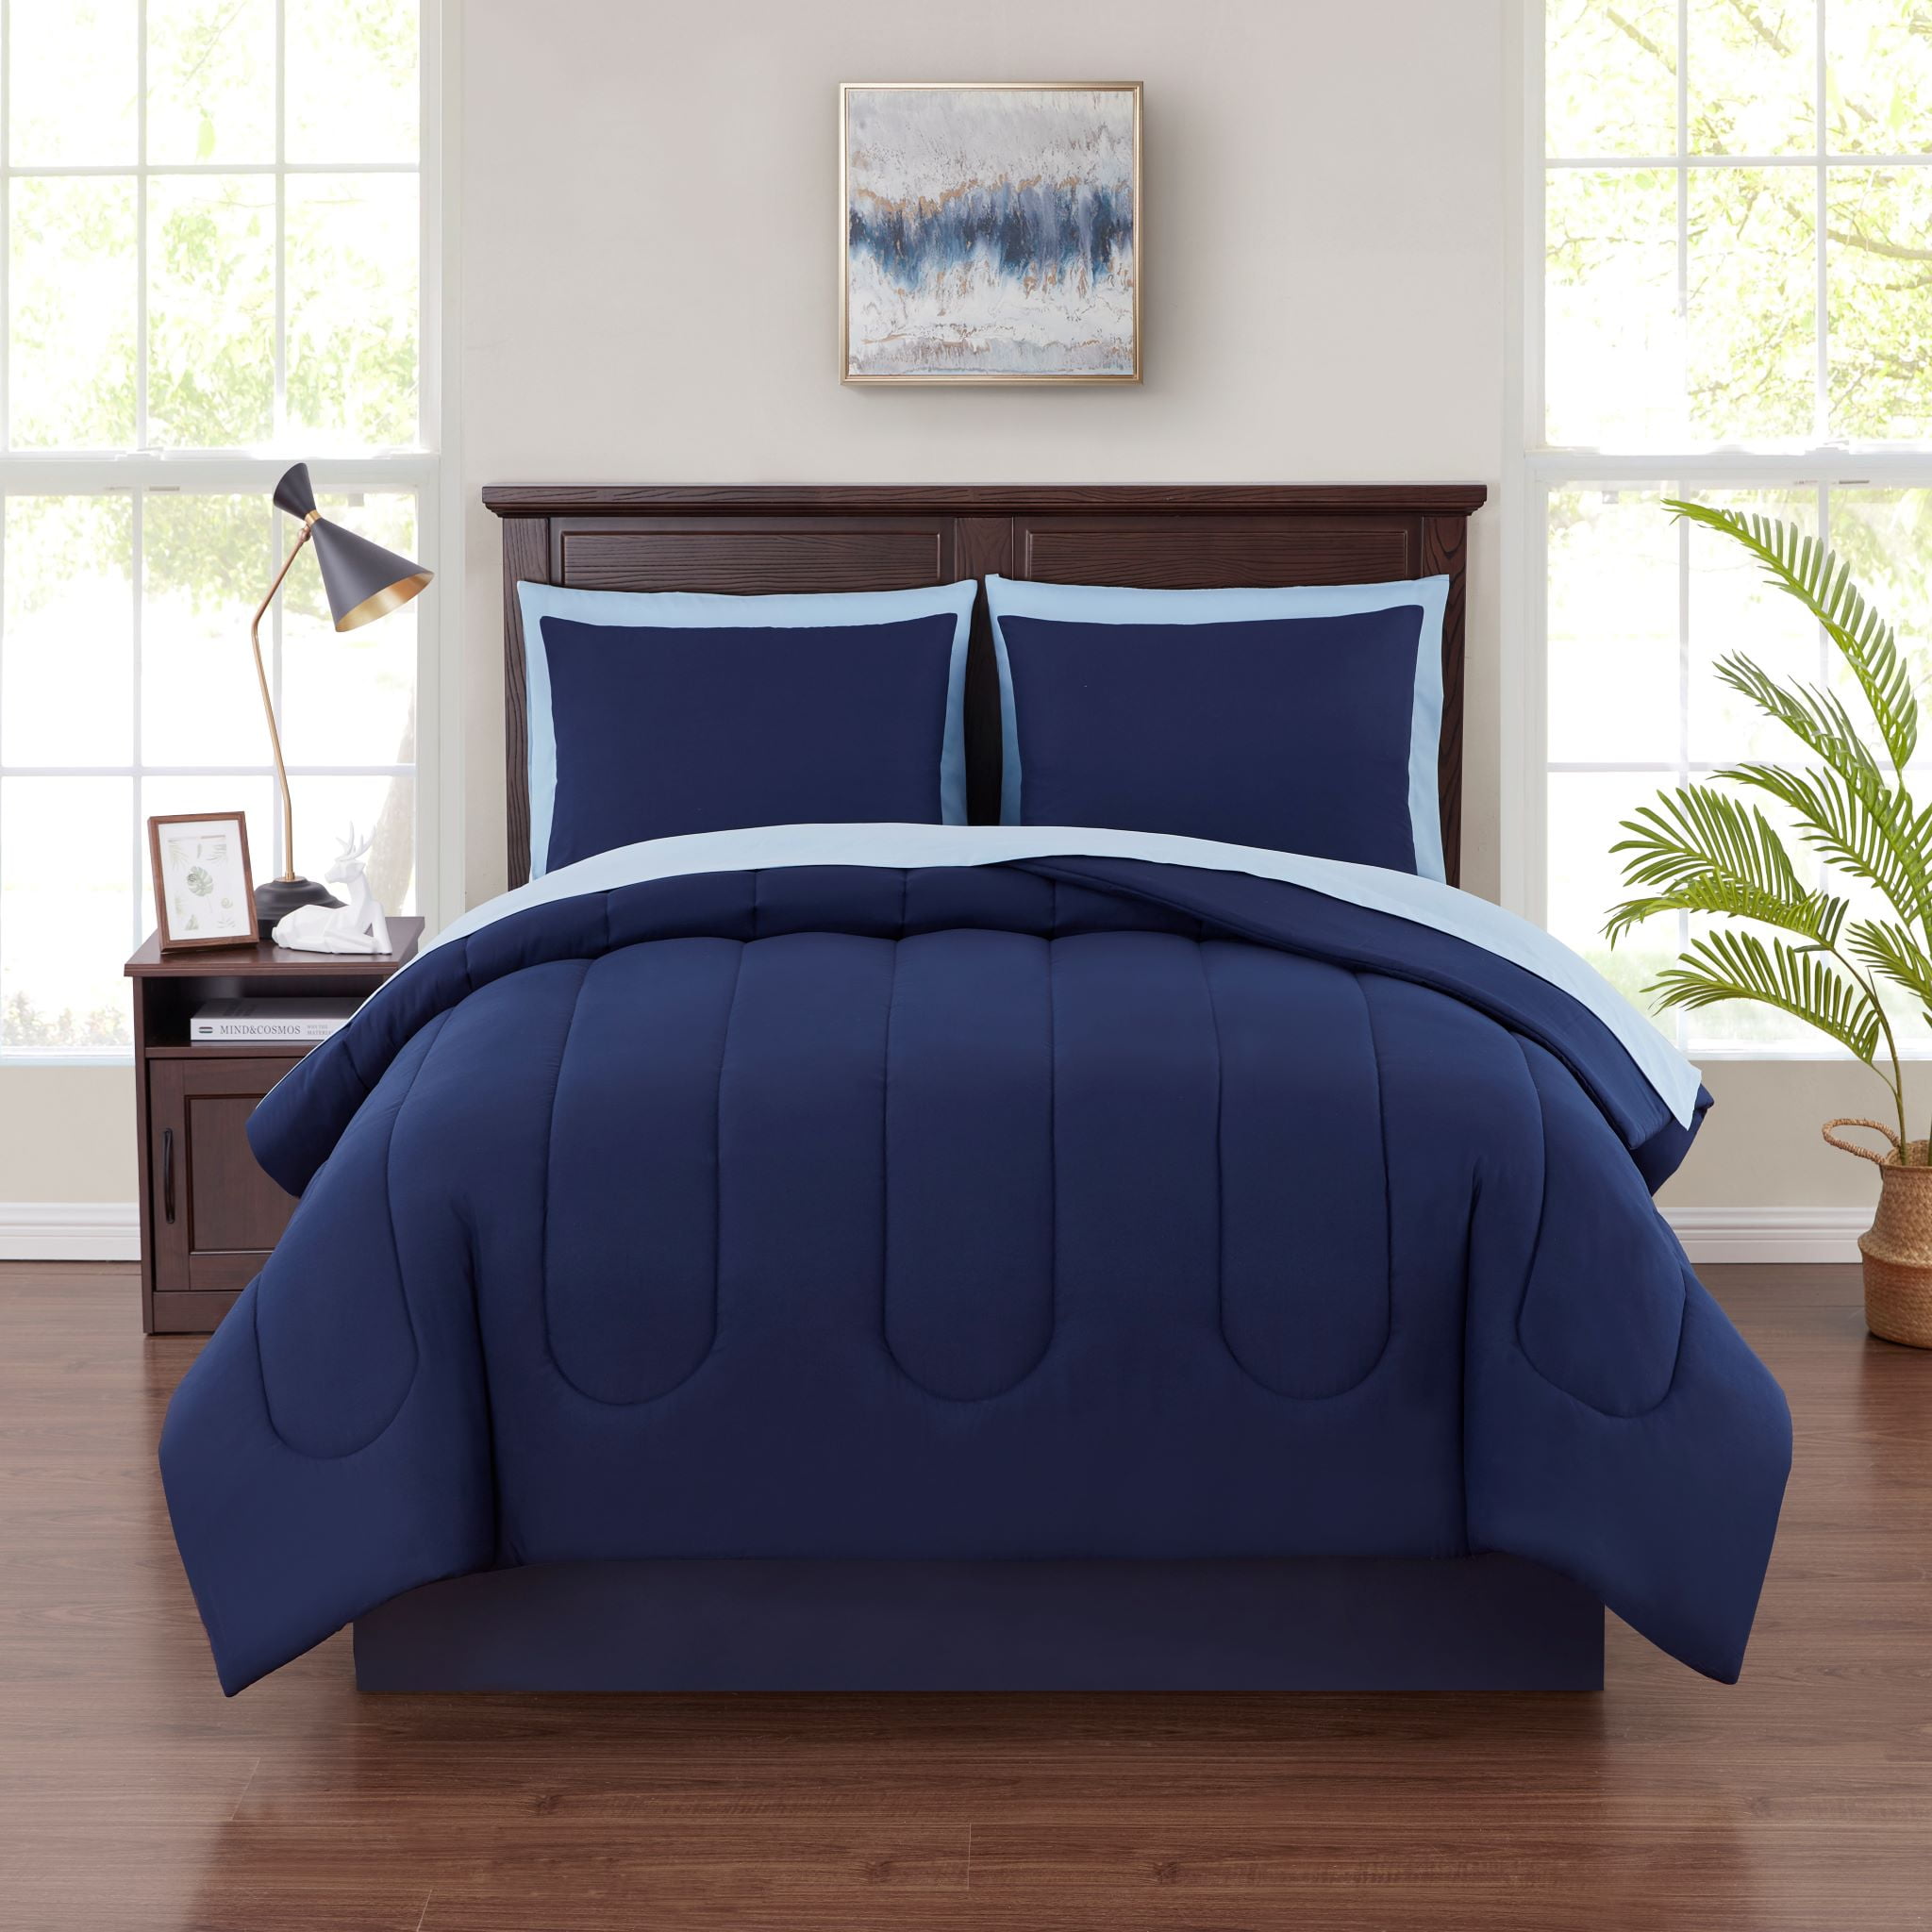 Mainstays Navy 7 Piece Bed in a Bag Comforter Set with Sheets, Queen